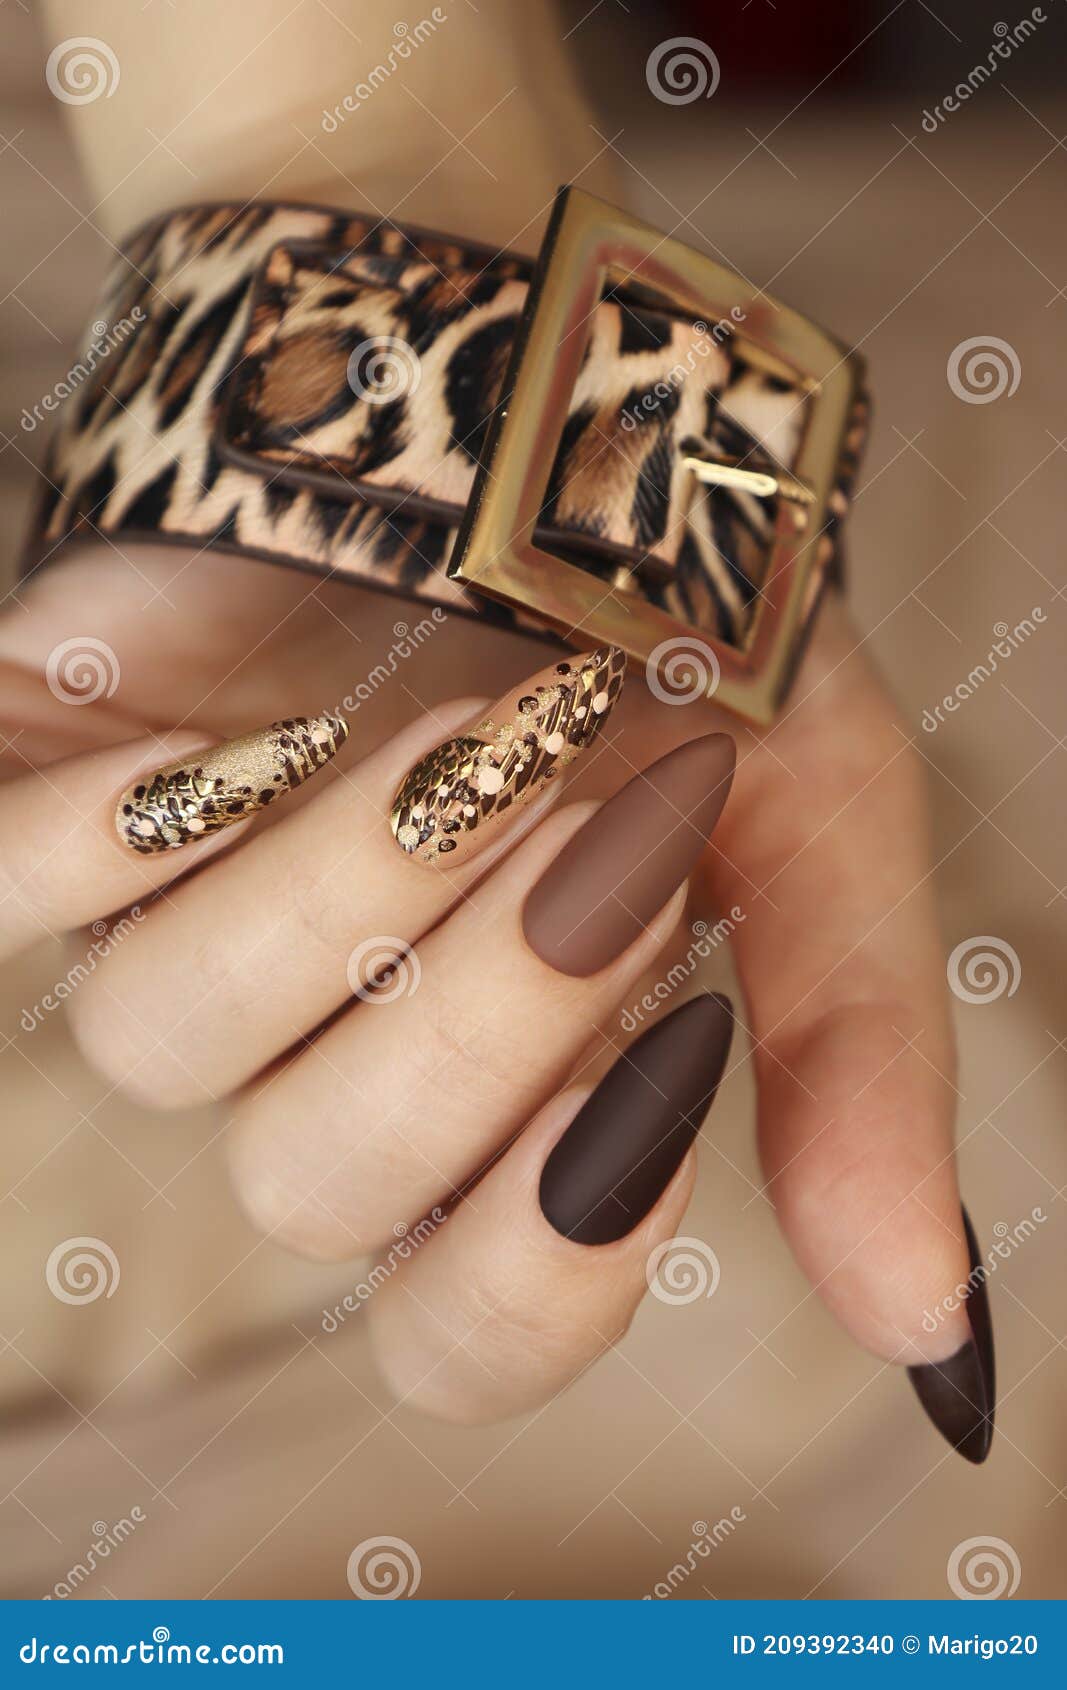 Luxurious Multicolored Manicure with Animal Design Stock Photo - Image of  design, nails: 209392340